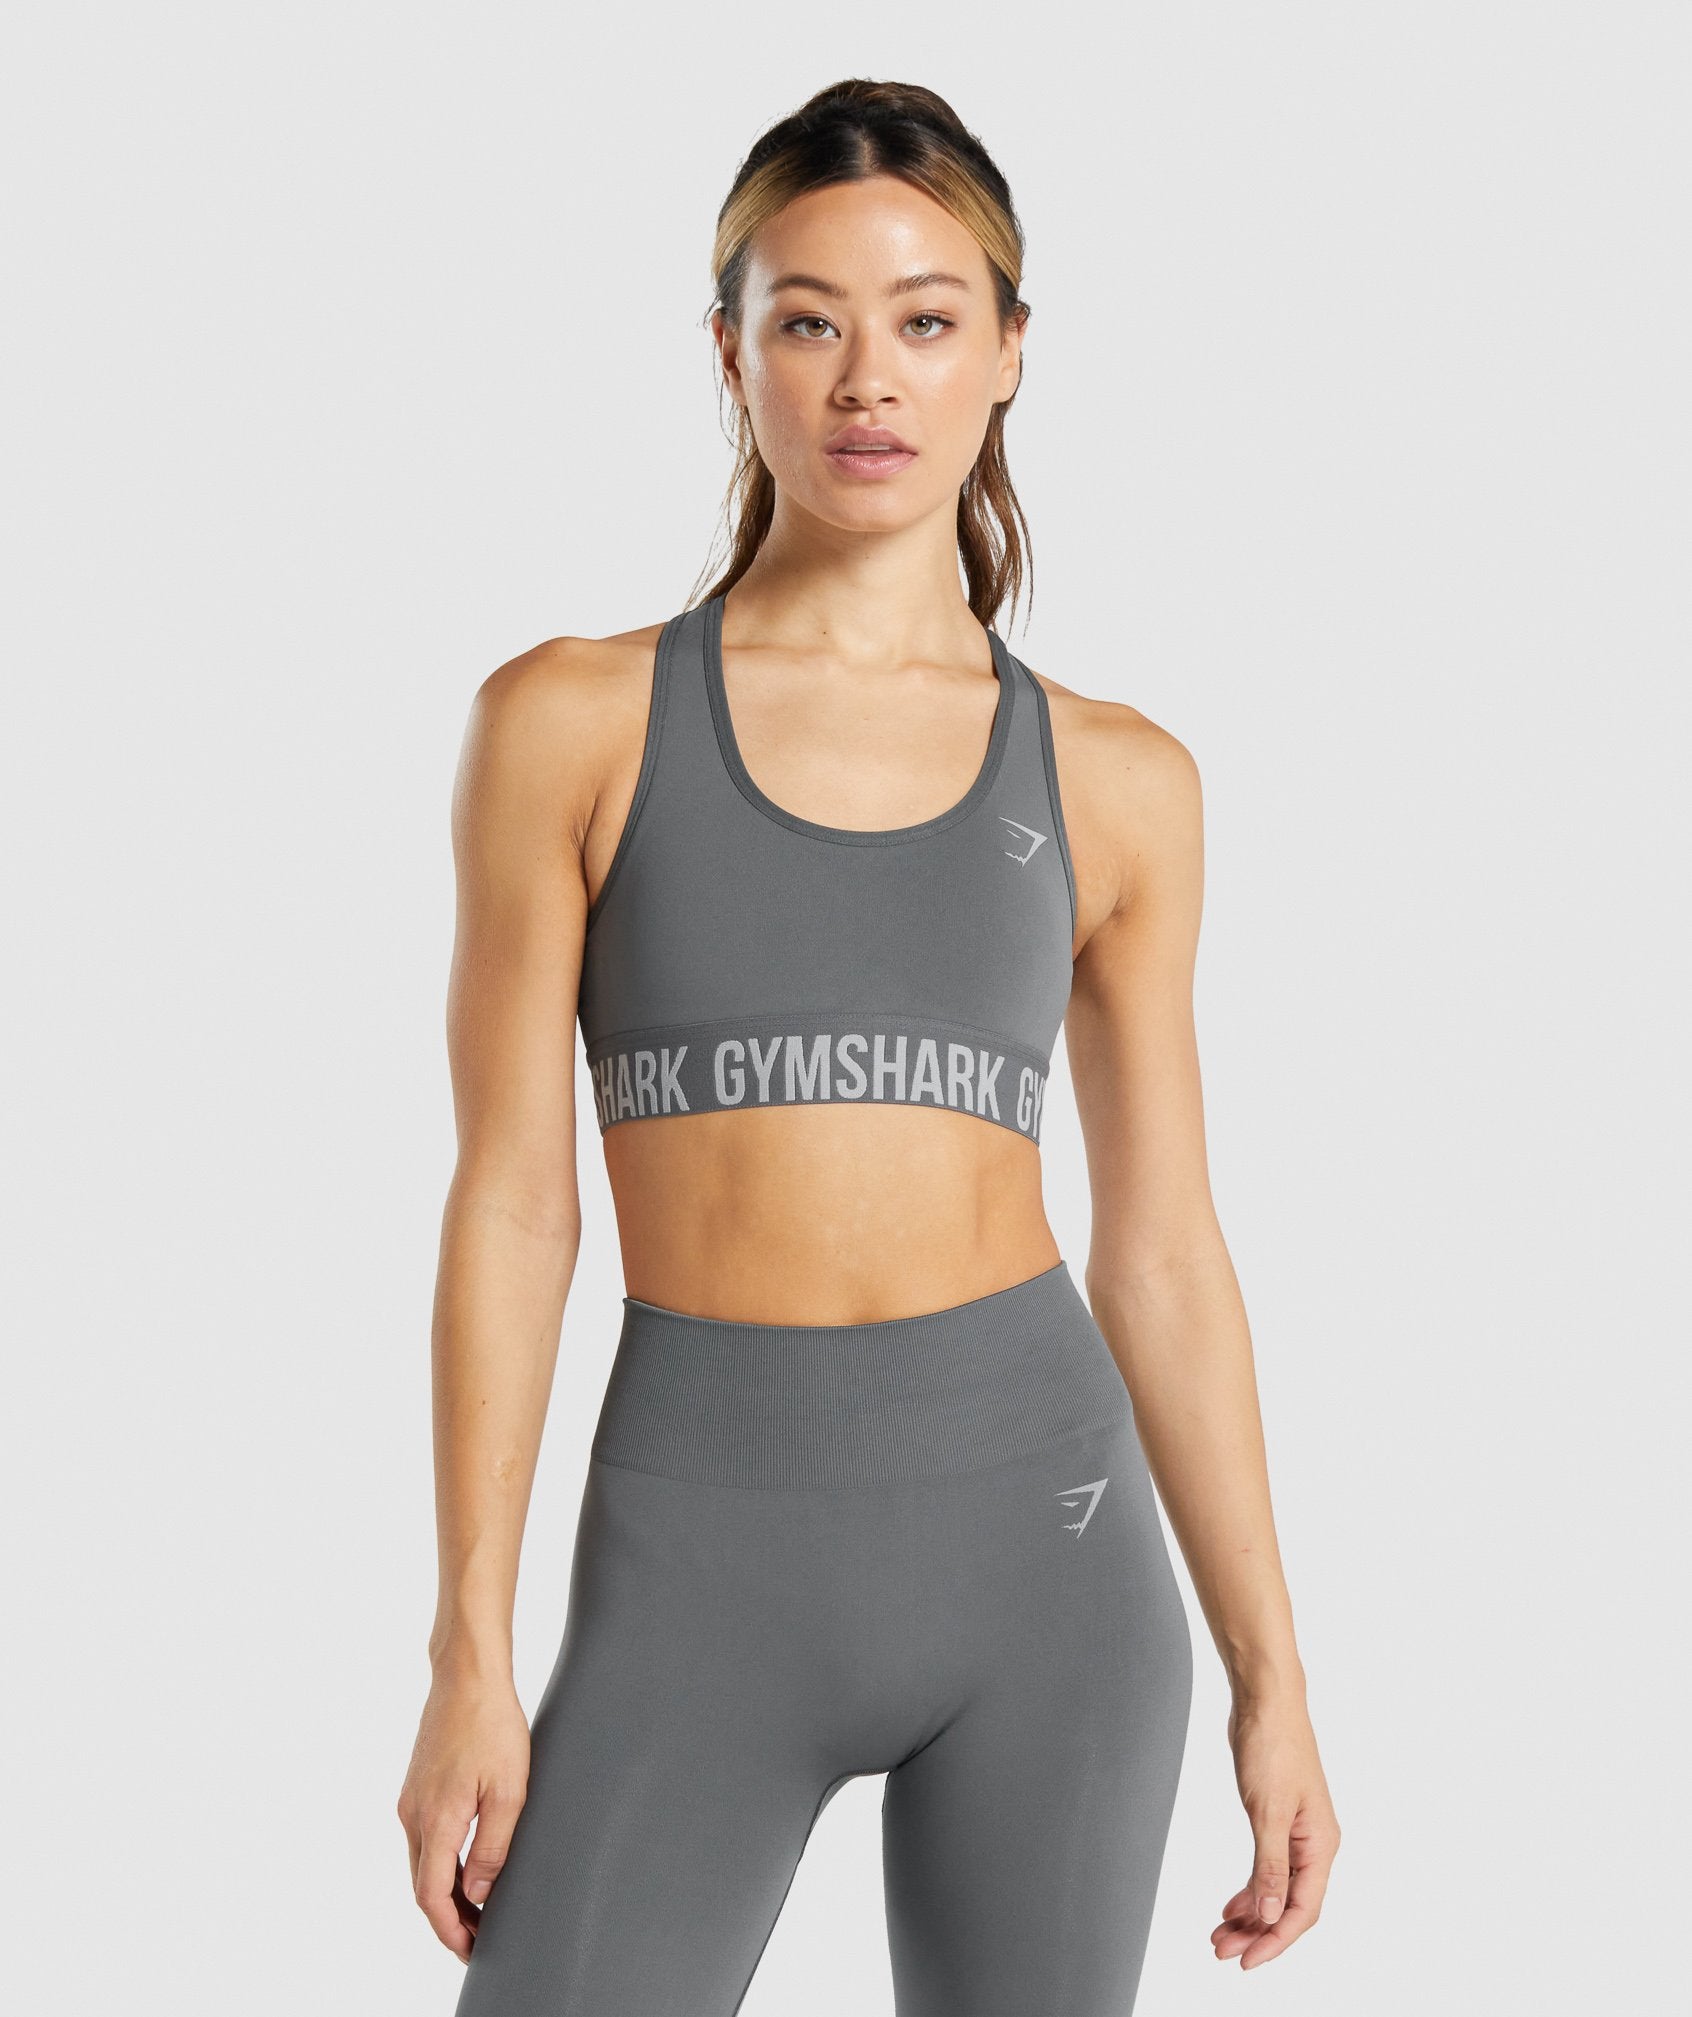 Sports Bra, Activewear. Pro-Fit Seamless Grey. Pre-Owned. Size M.